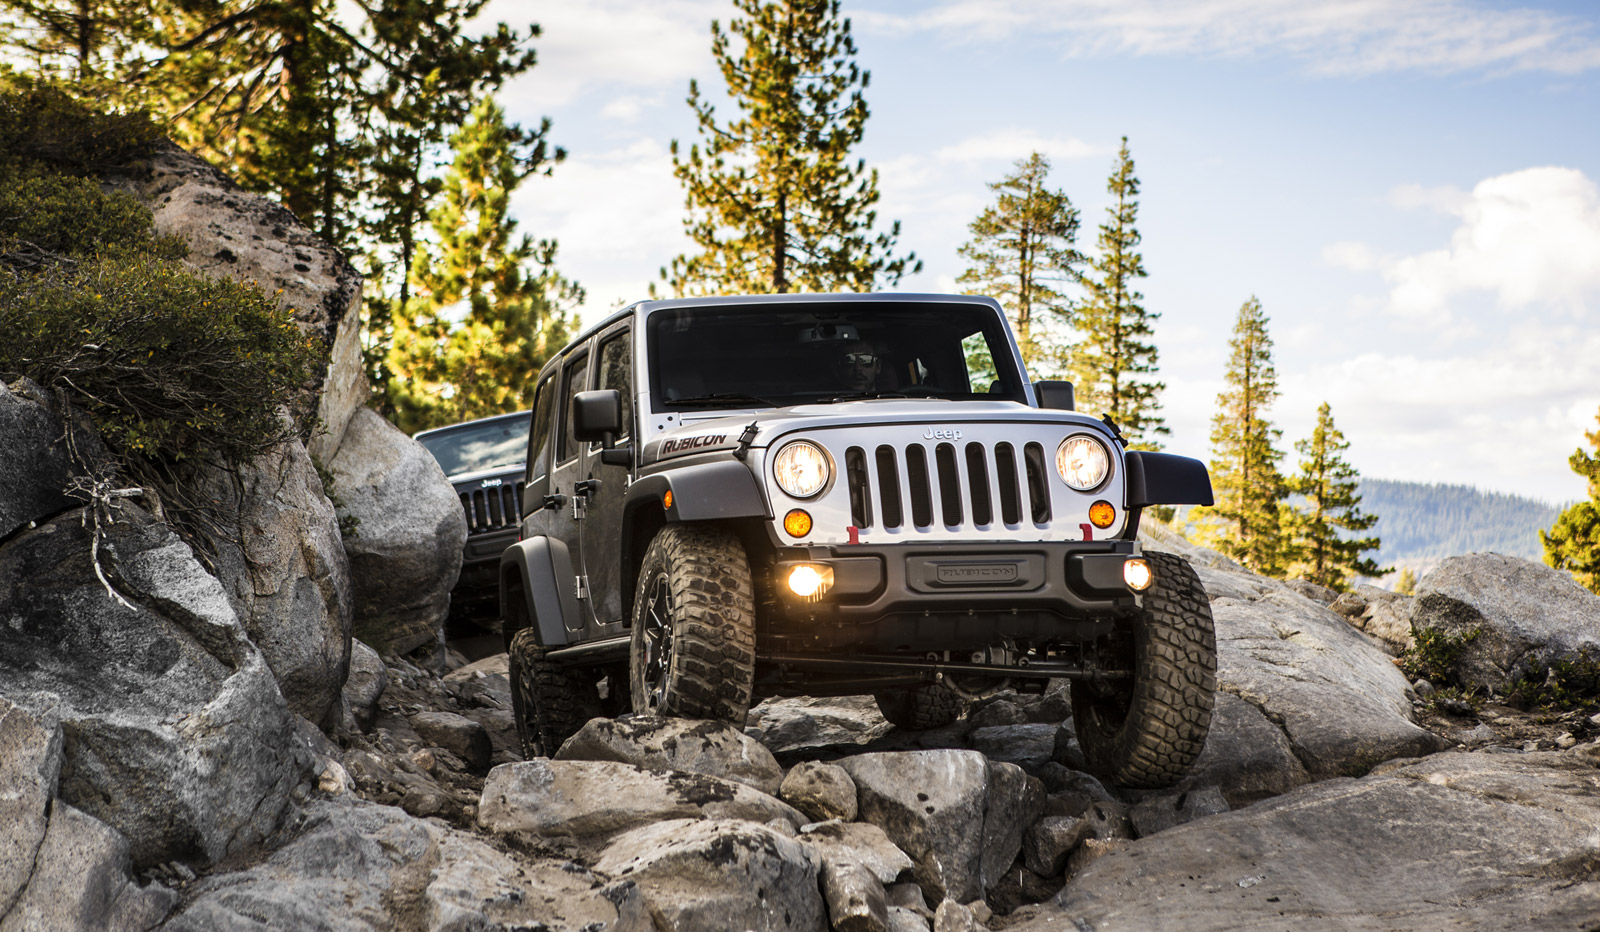 Next-Gen Jeep Wrangler To Lose Solid Axle Along With Weight?